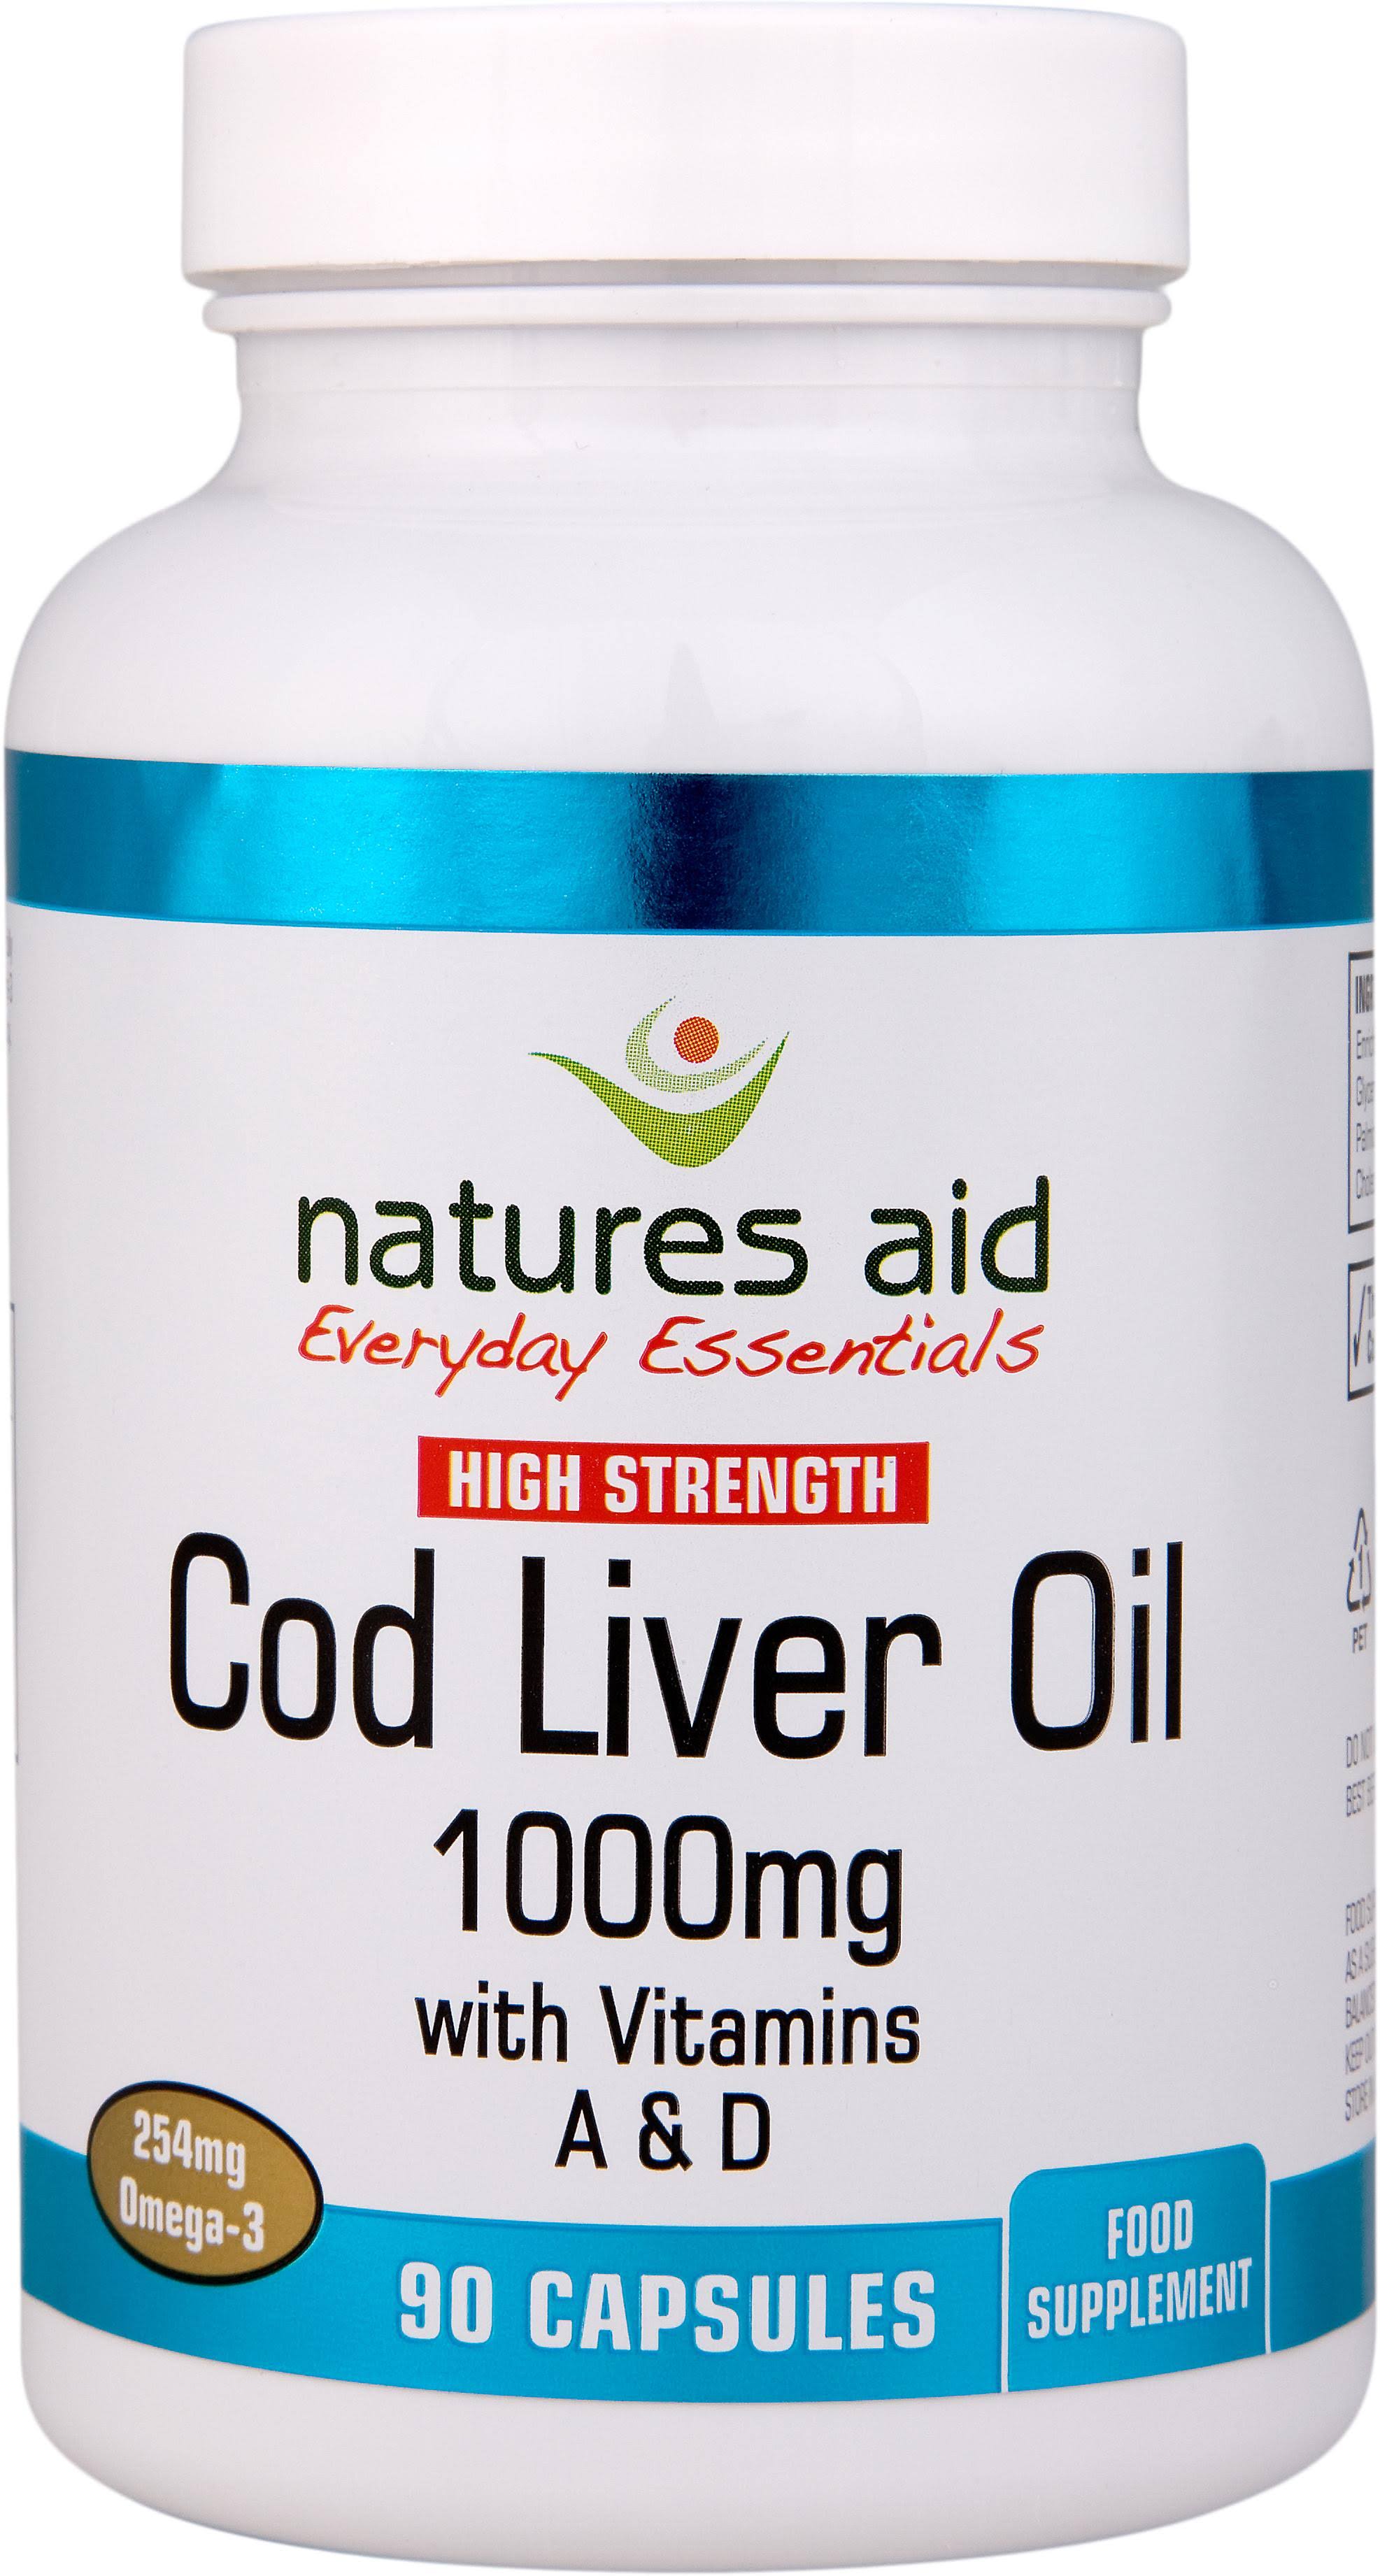 Natures Aid Cod Liver Oil - 90 Capsules, 1000mg